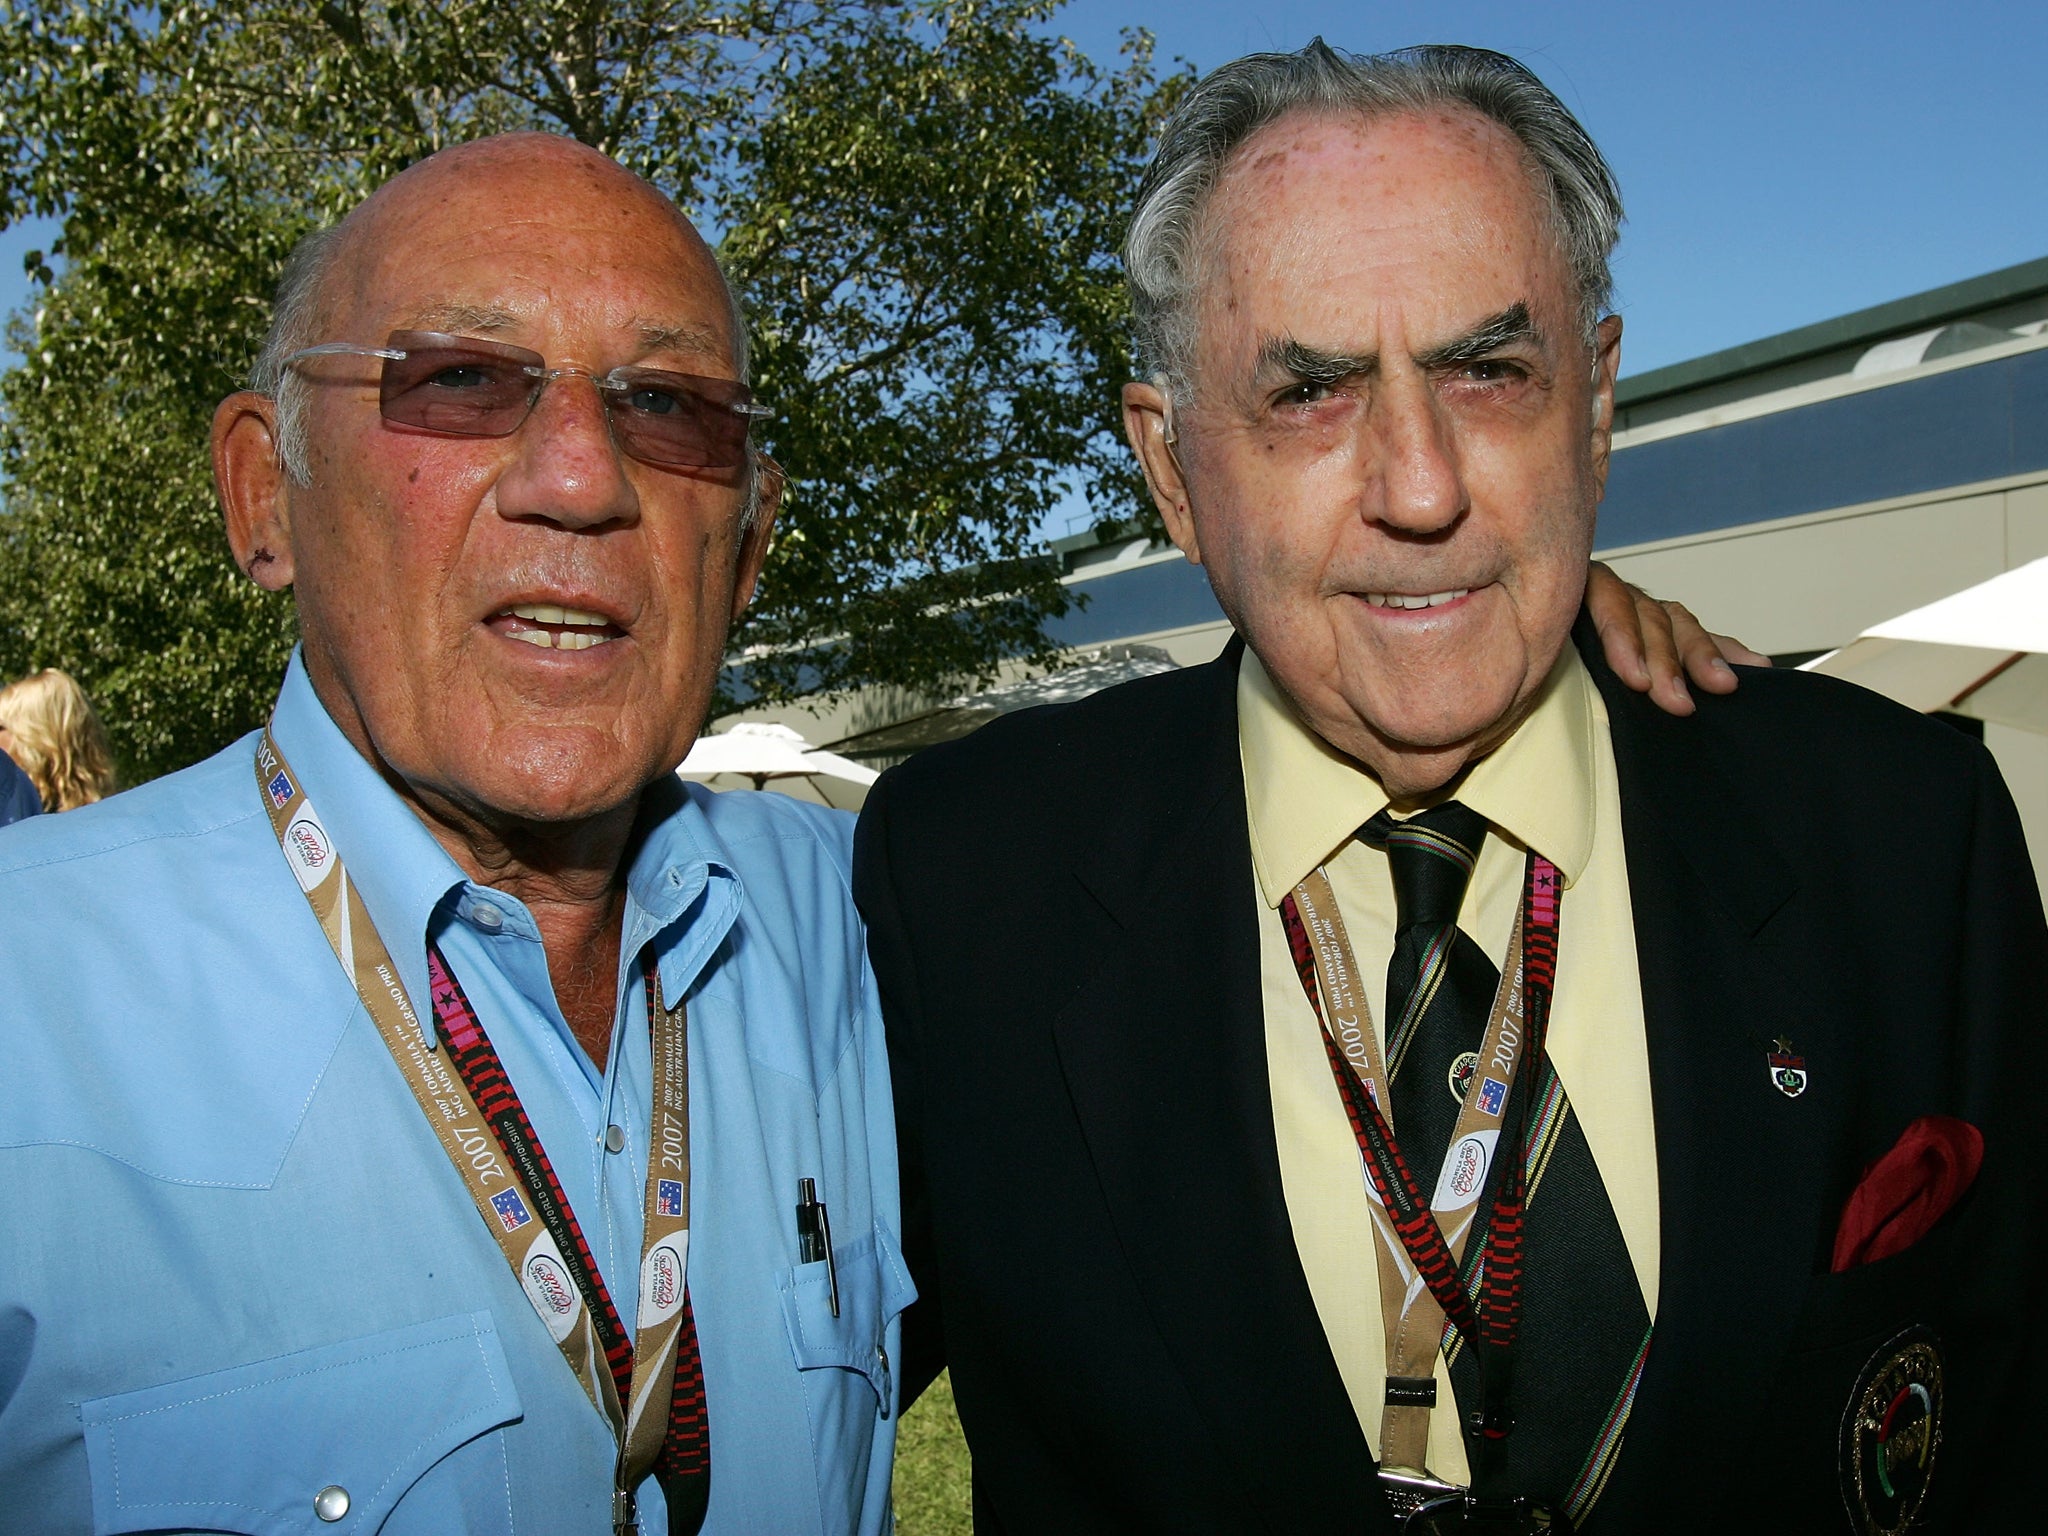 Former Formula One drivers Sir Stirling Moss of Great Britain and Sir Jack Brabham of Australia pose together at the Australian Formula One Grand Prix 2007